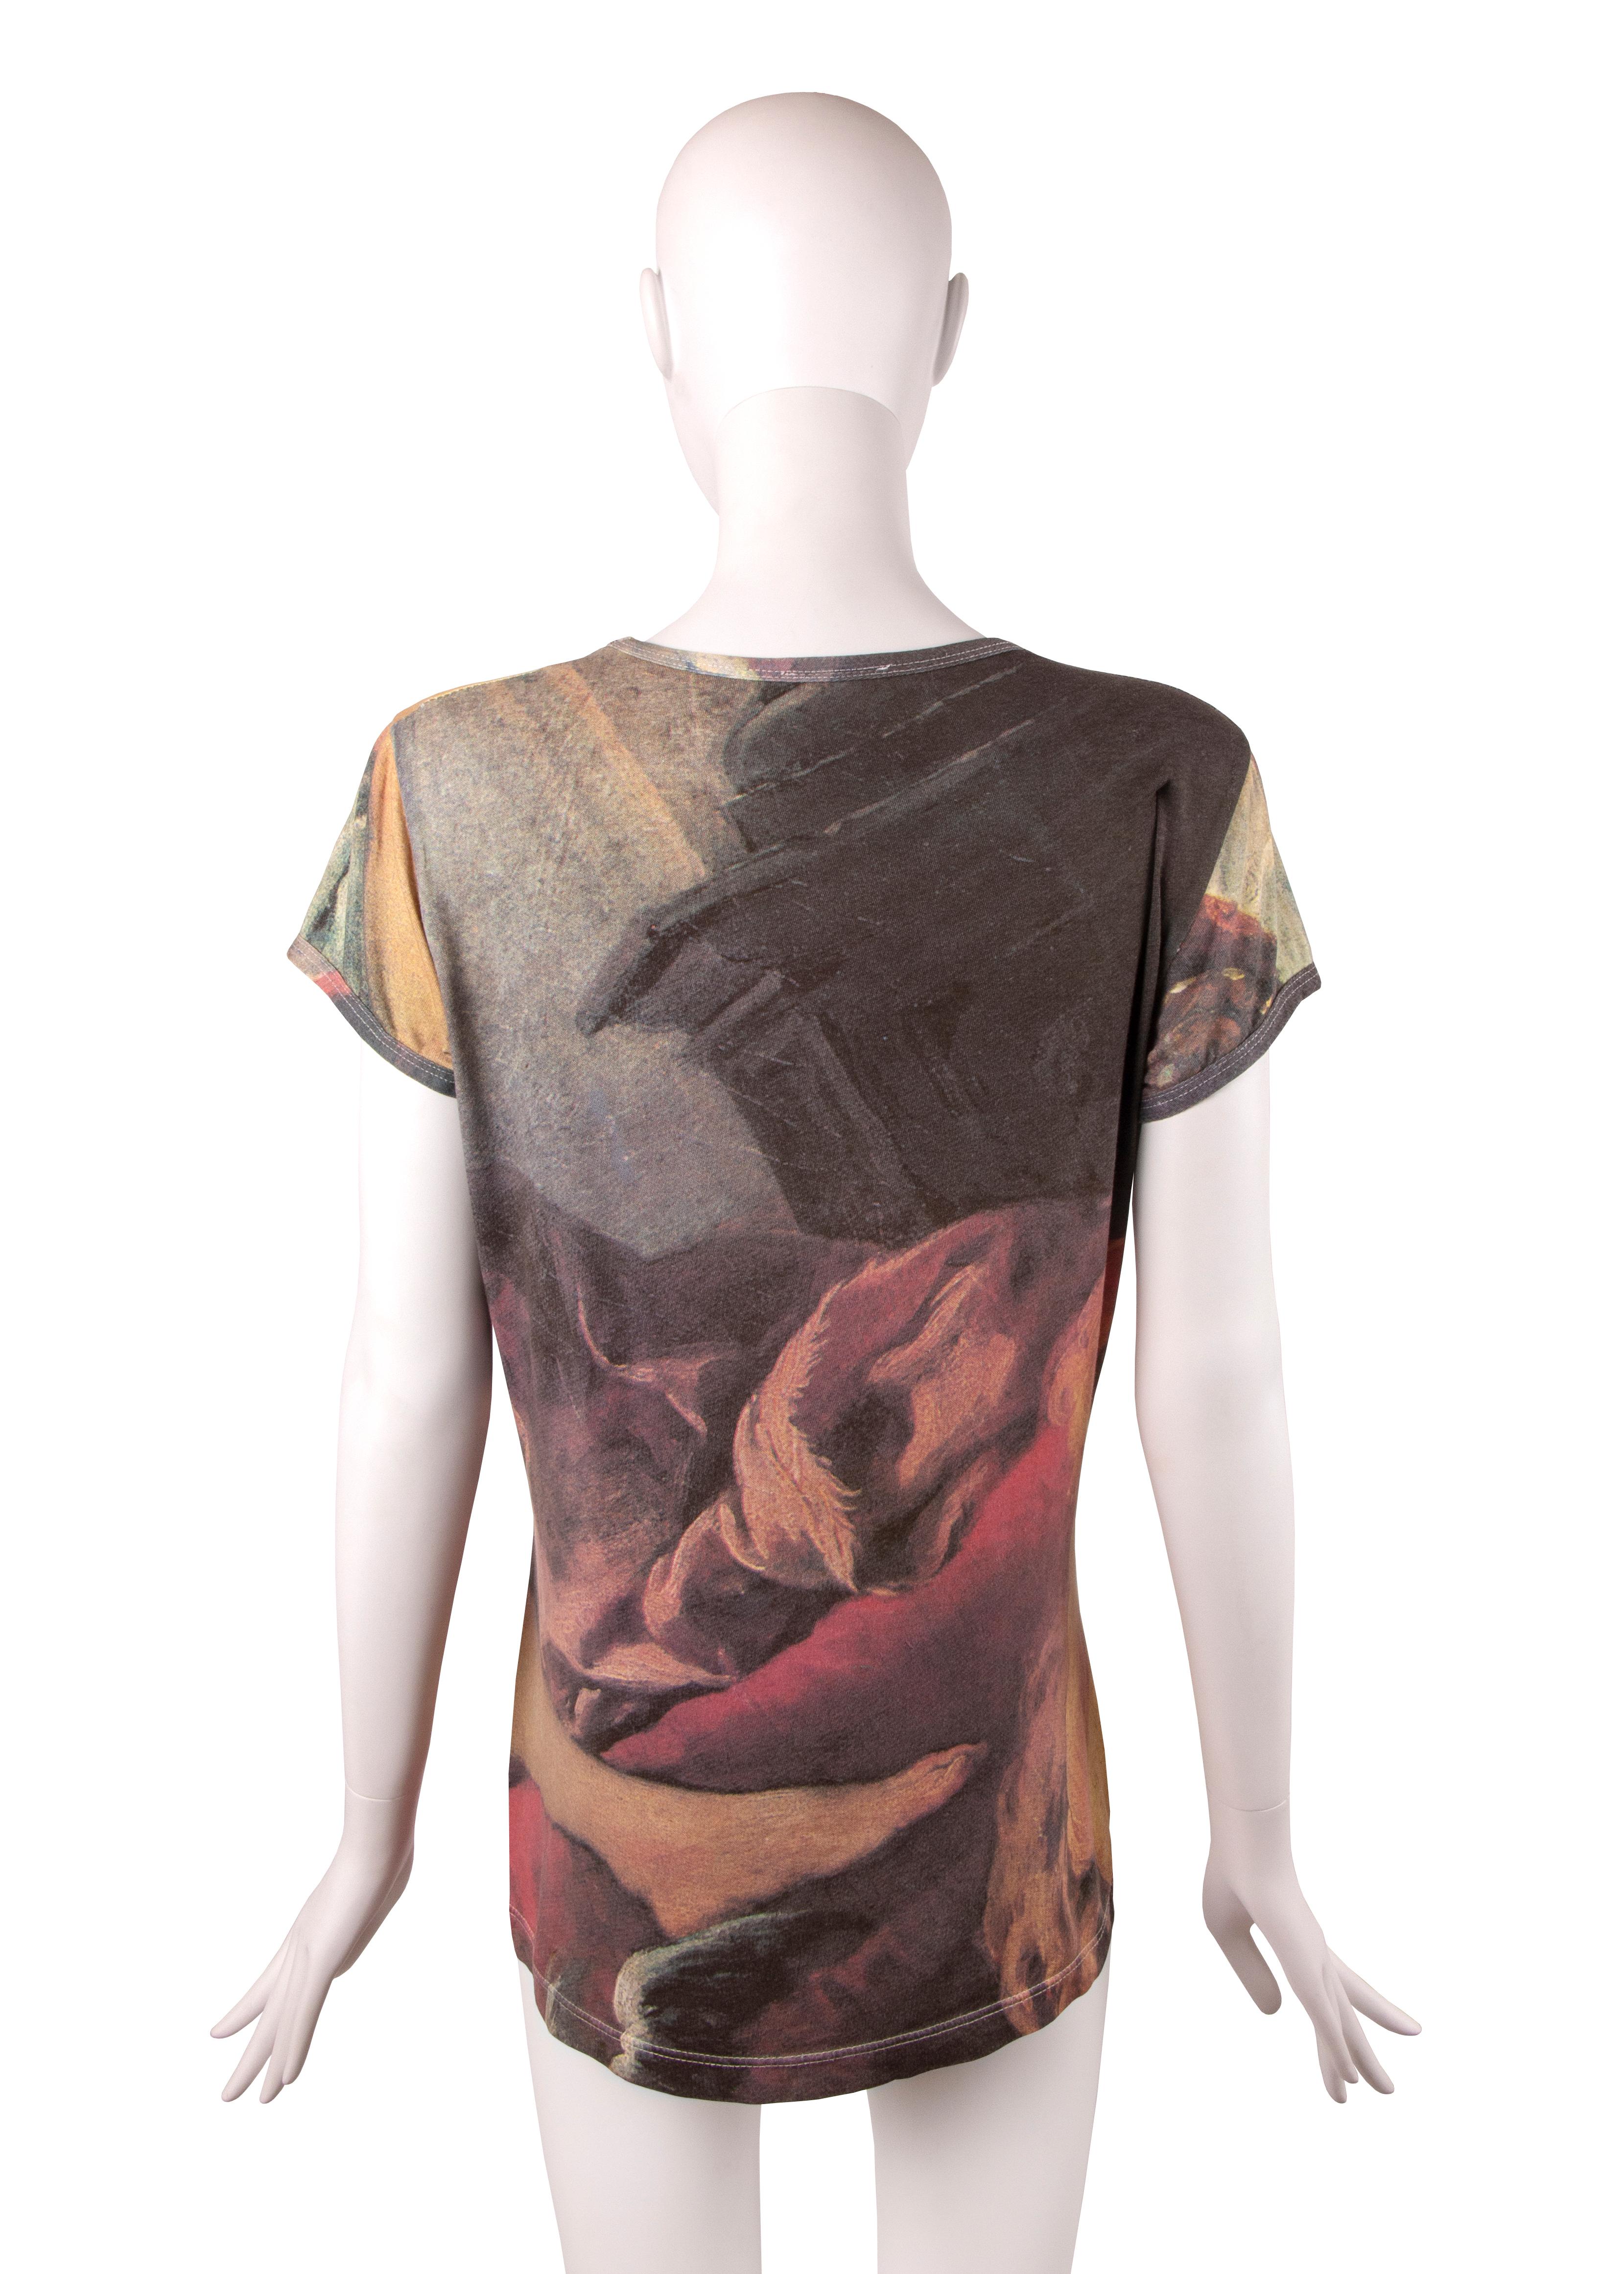 Vivienne Westwood 'Grand Hotel' Francois Boucher Hercules t-shirt, ss 1993 In Good Condition For Sale In Melbourne, AU